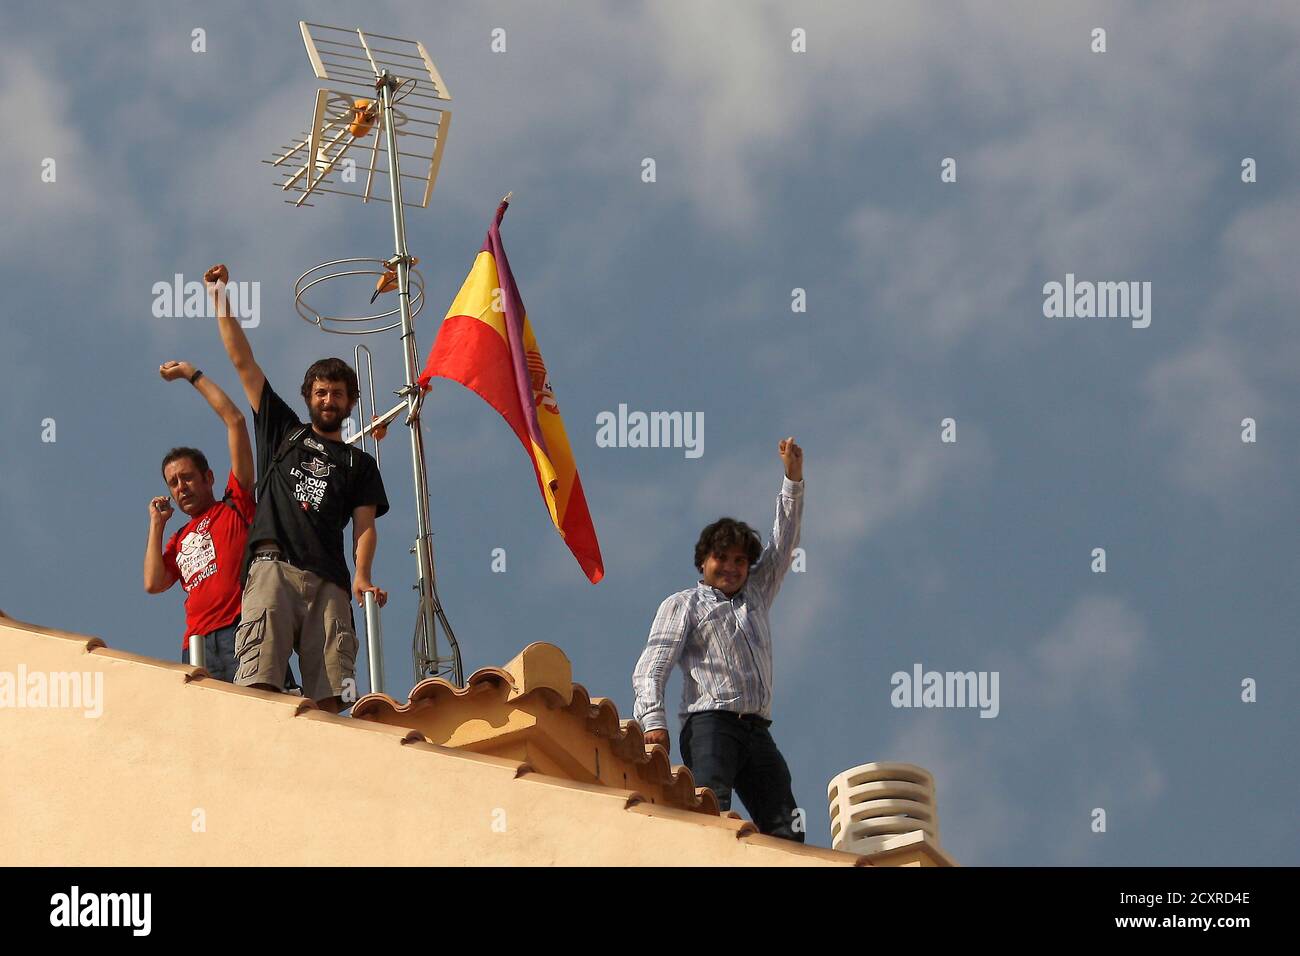 Activists raise their fists next to a Spanish Republican era flag on a roof after Spanish riot police evicted several families of an unoccupied building of flats in Malaga, southern Spain October 3, 2013. A total of 13 families, included 12 children, had occupied the building since February. Members from various support platforms failed to stop the eviction and three activists were arrested when they refused to leave the roof of building, according to local media. REUTERS/Jon Nazca (SPAIN - Tags: CIVIL UNREST POLITICS BUSINESS REAL ESTATE SOCIETY) Stock Photo